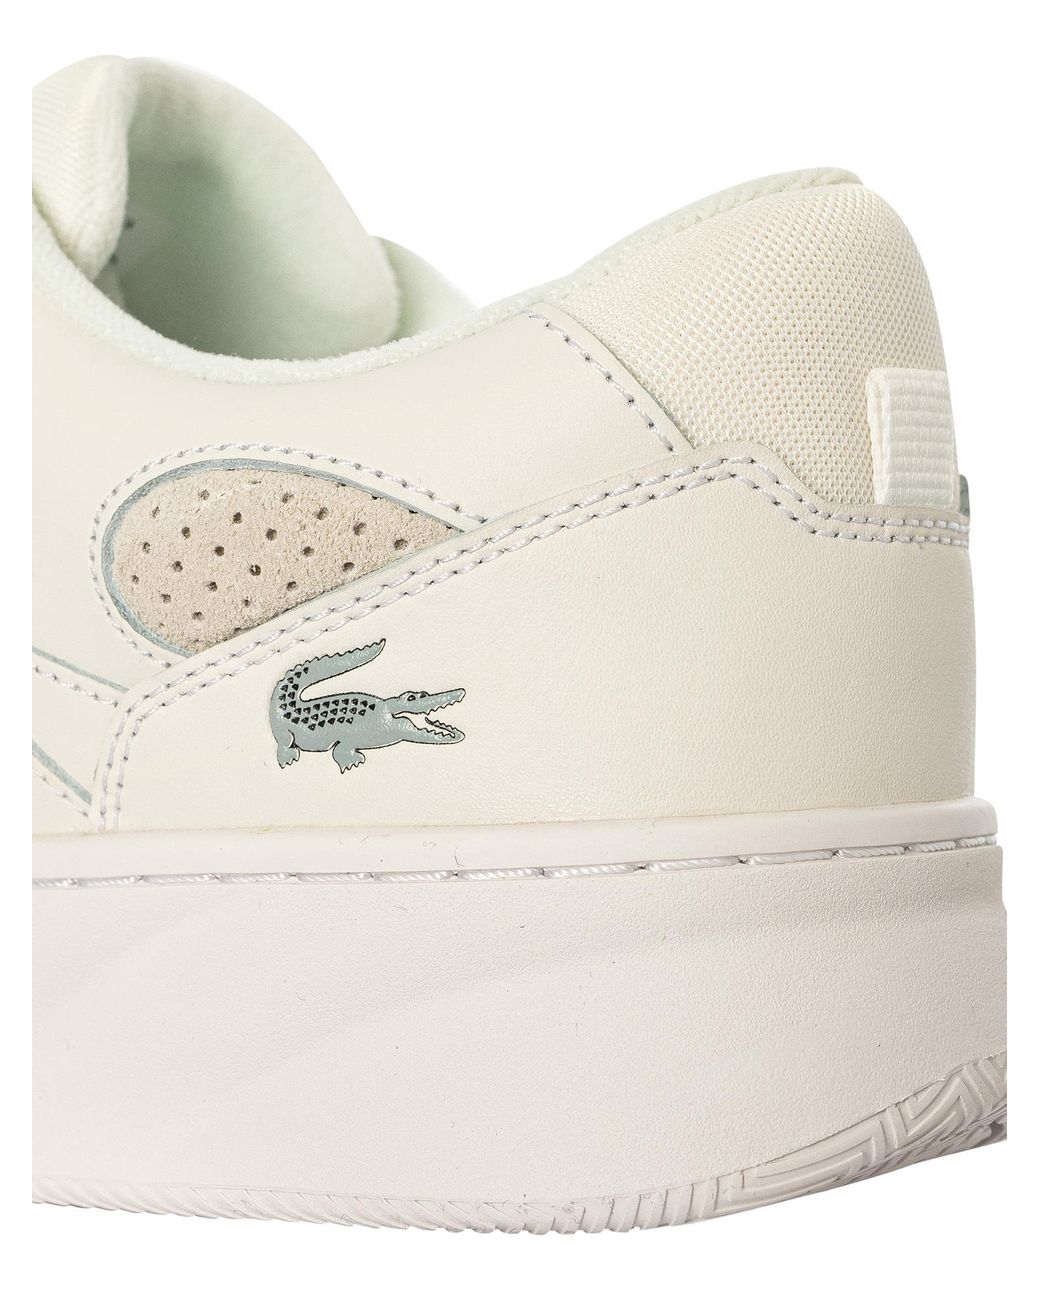 Lacoste L005 222 2 Sma Leather Trainers in White for Men | Lyst Canada